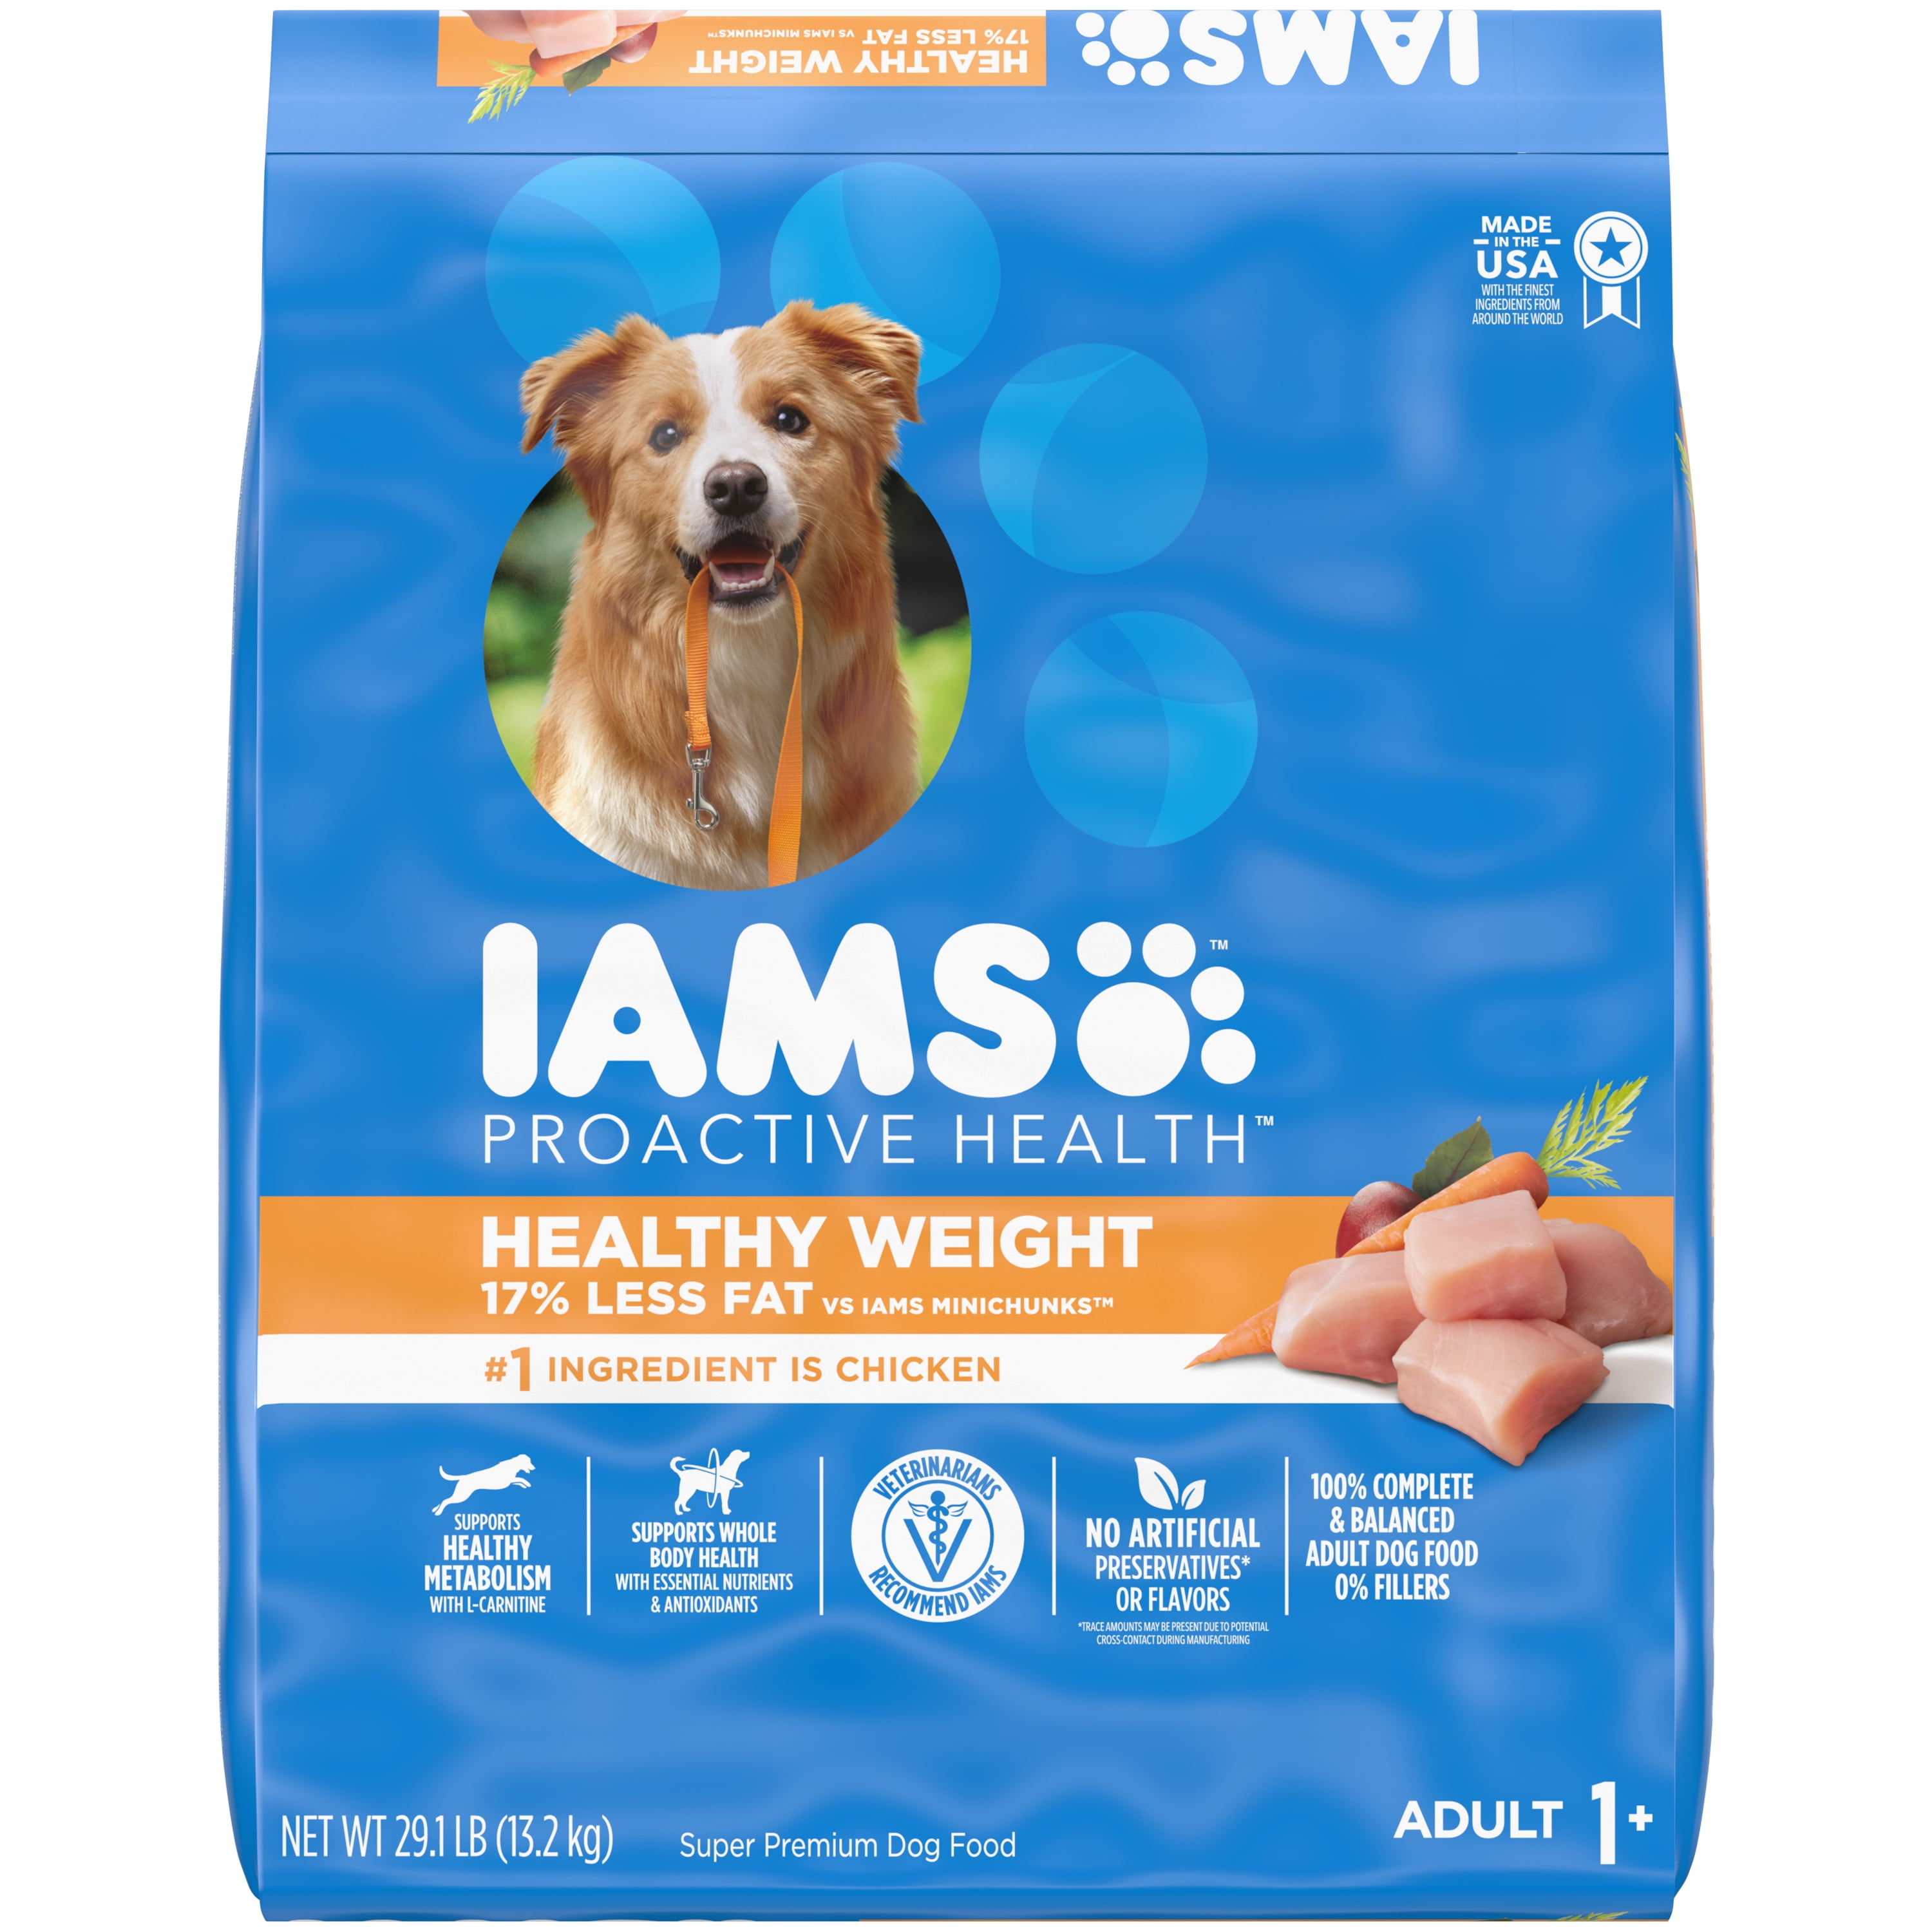 are there any recalls on iams dog food